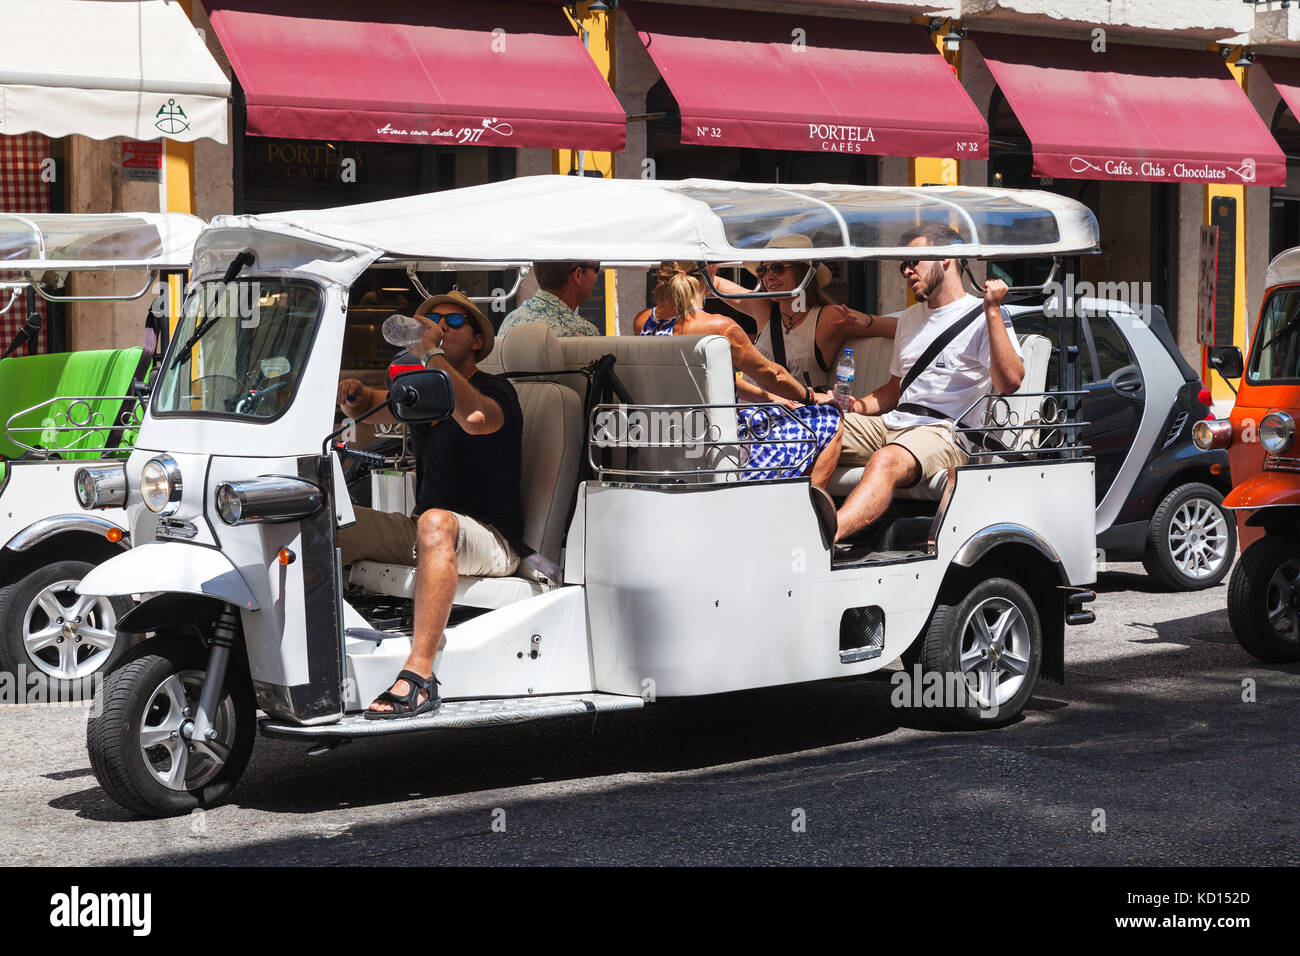 Lisbon, Portugal - August 12, 2017: White Tuk Tuk taxi cab rides the street of Lisbon with tourists as a passengers Stock Photo